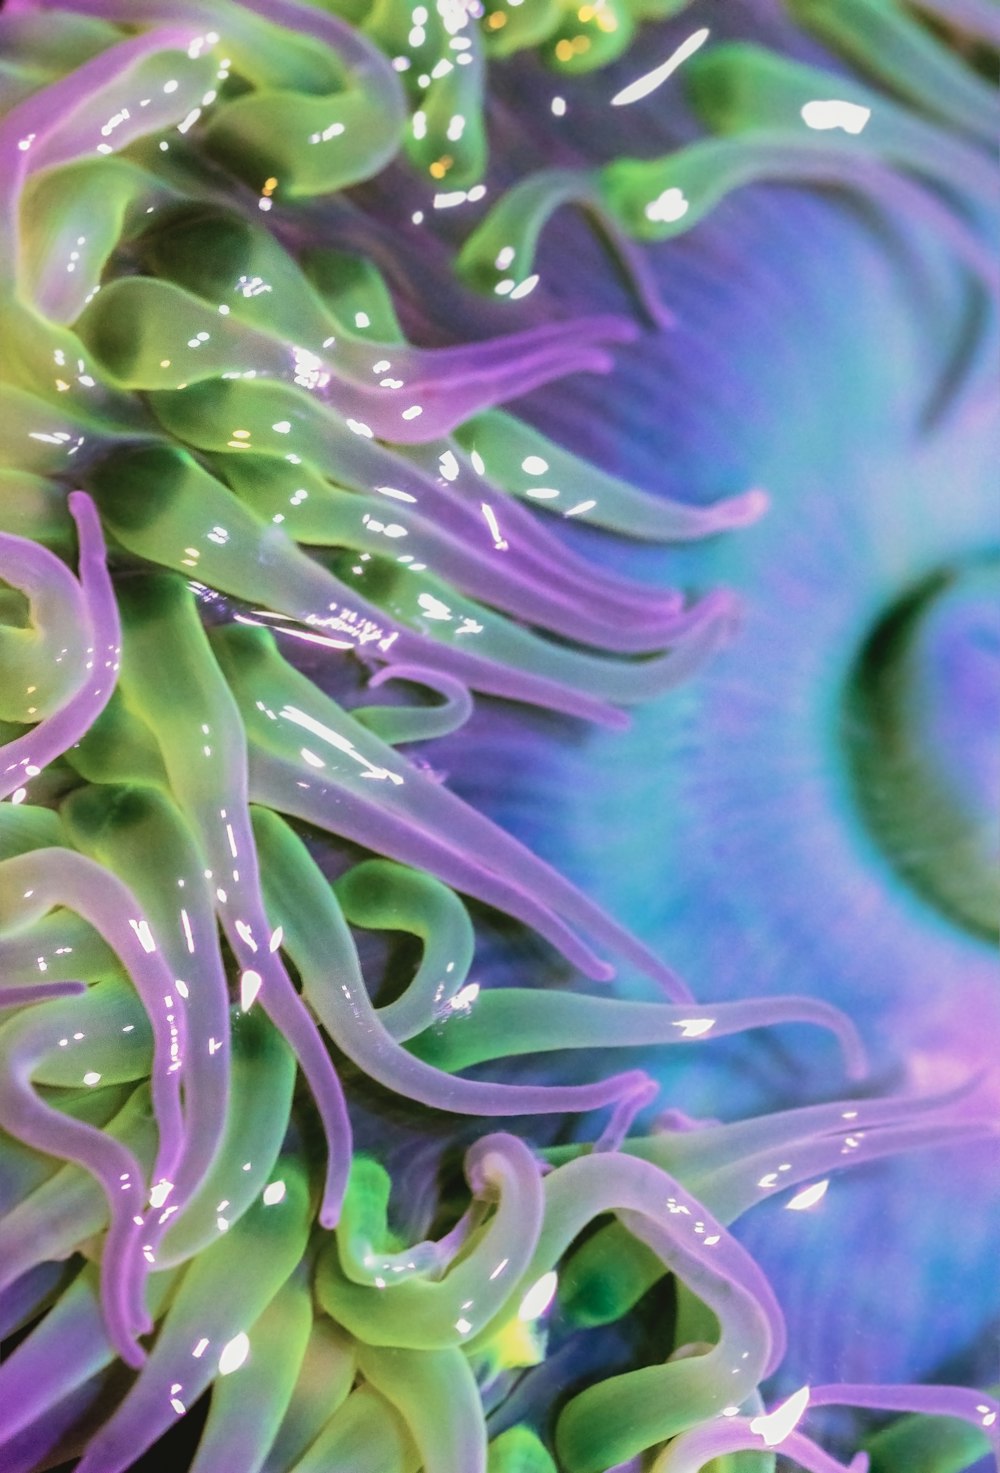 a close up of a purple and green sea anemone